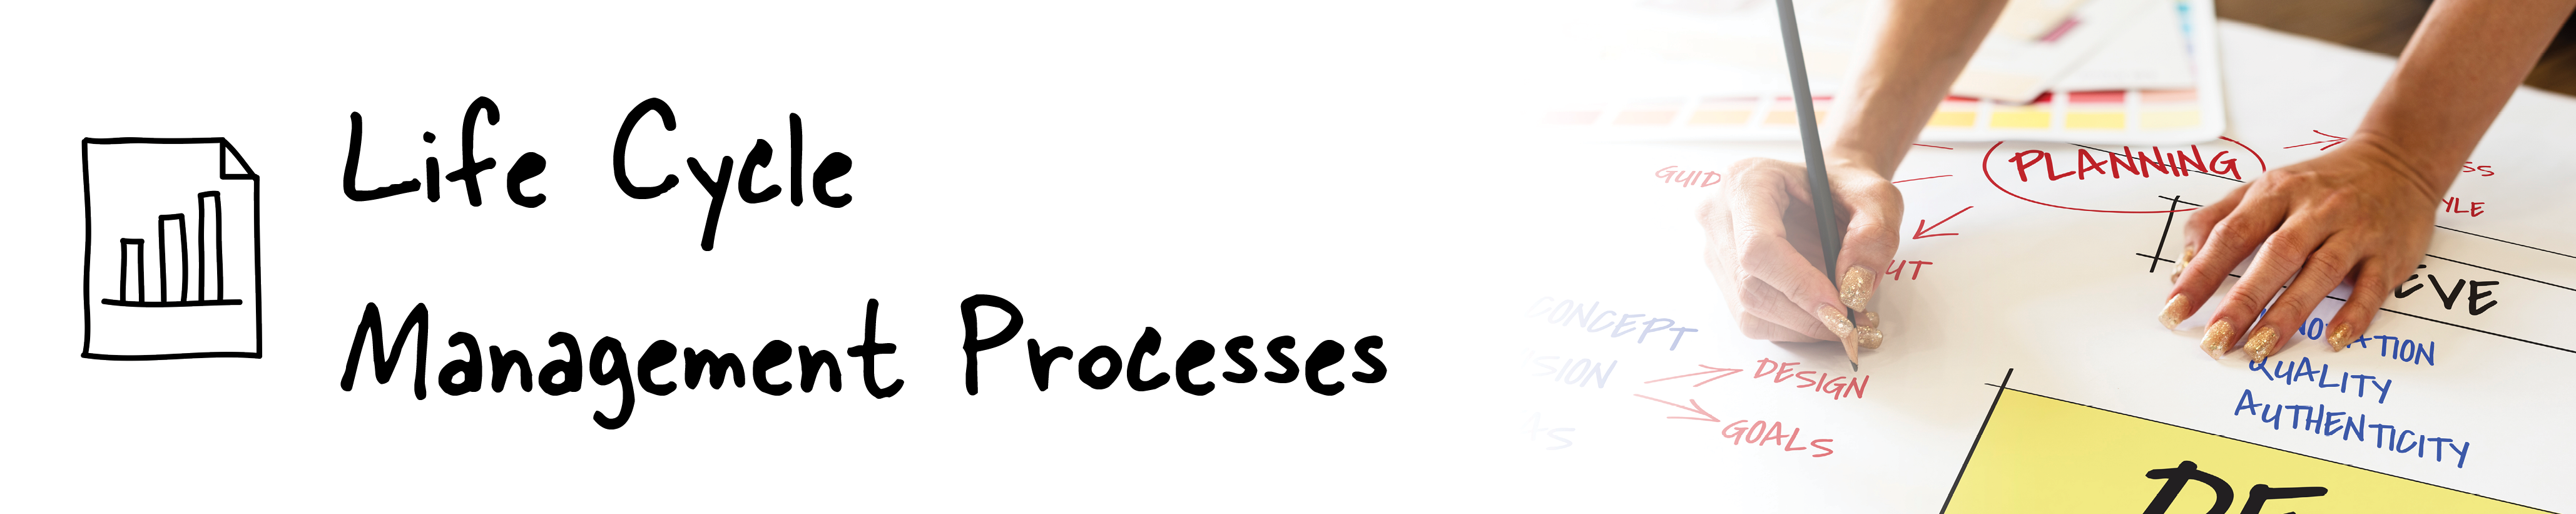 Life Cycle Management Processes